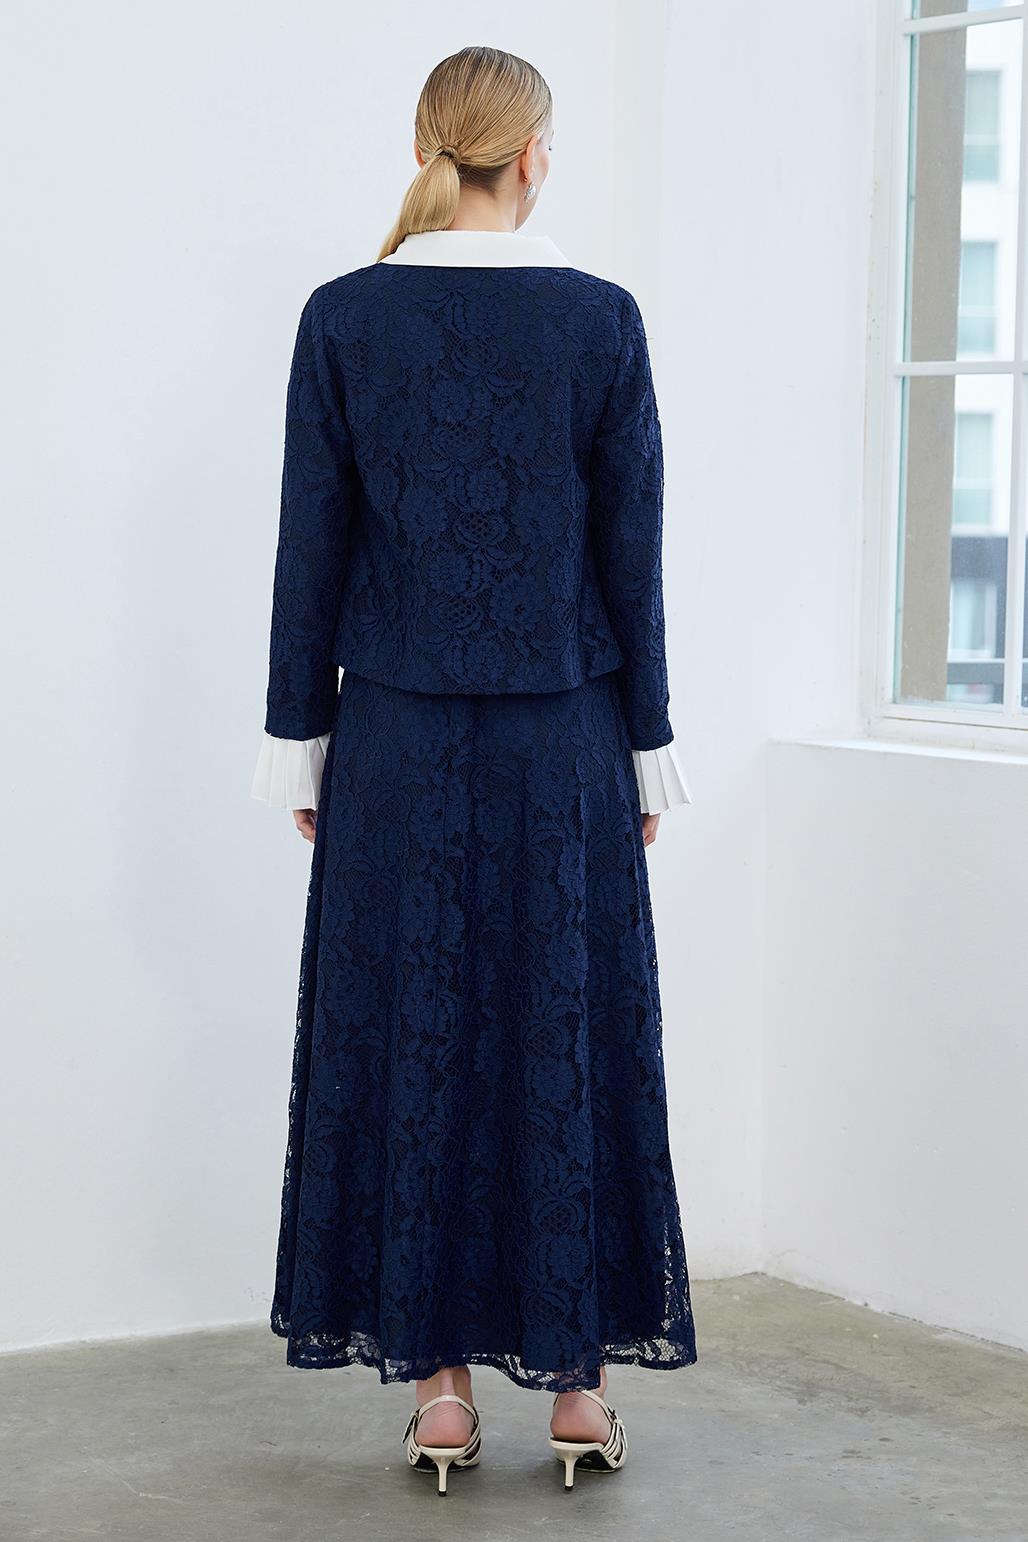 Lace Pleat Sleeve Detailed Jacket Bell Skirt Set Navy Blue